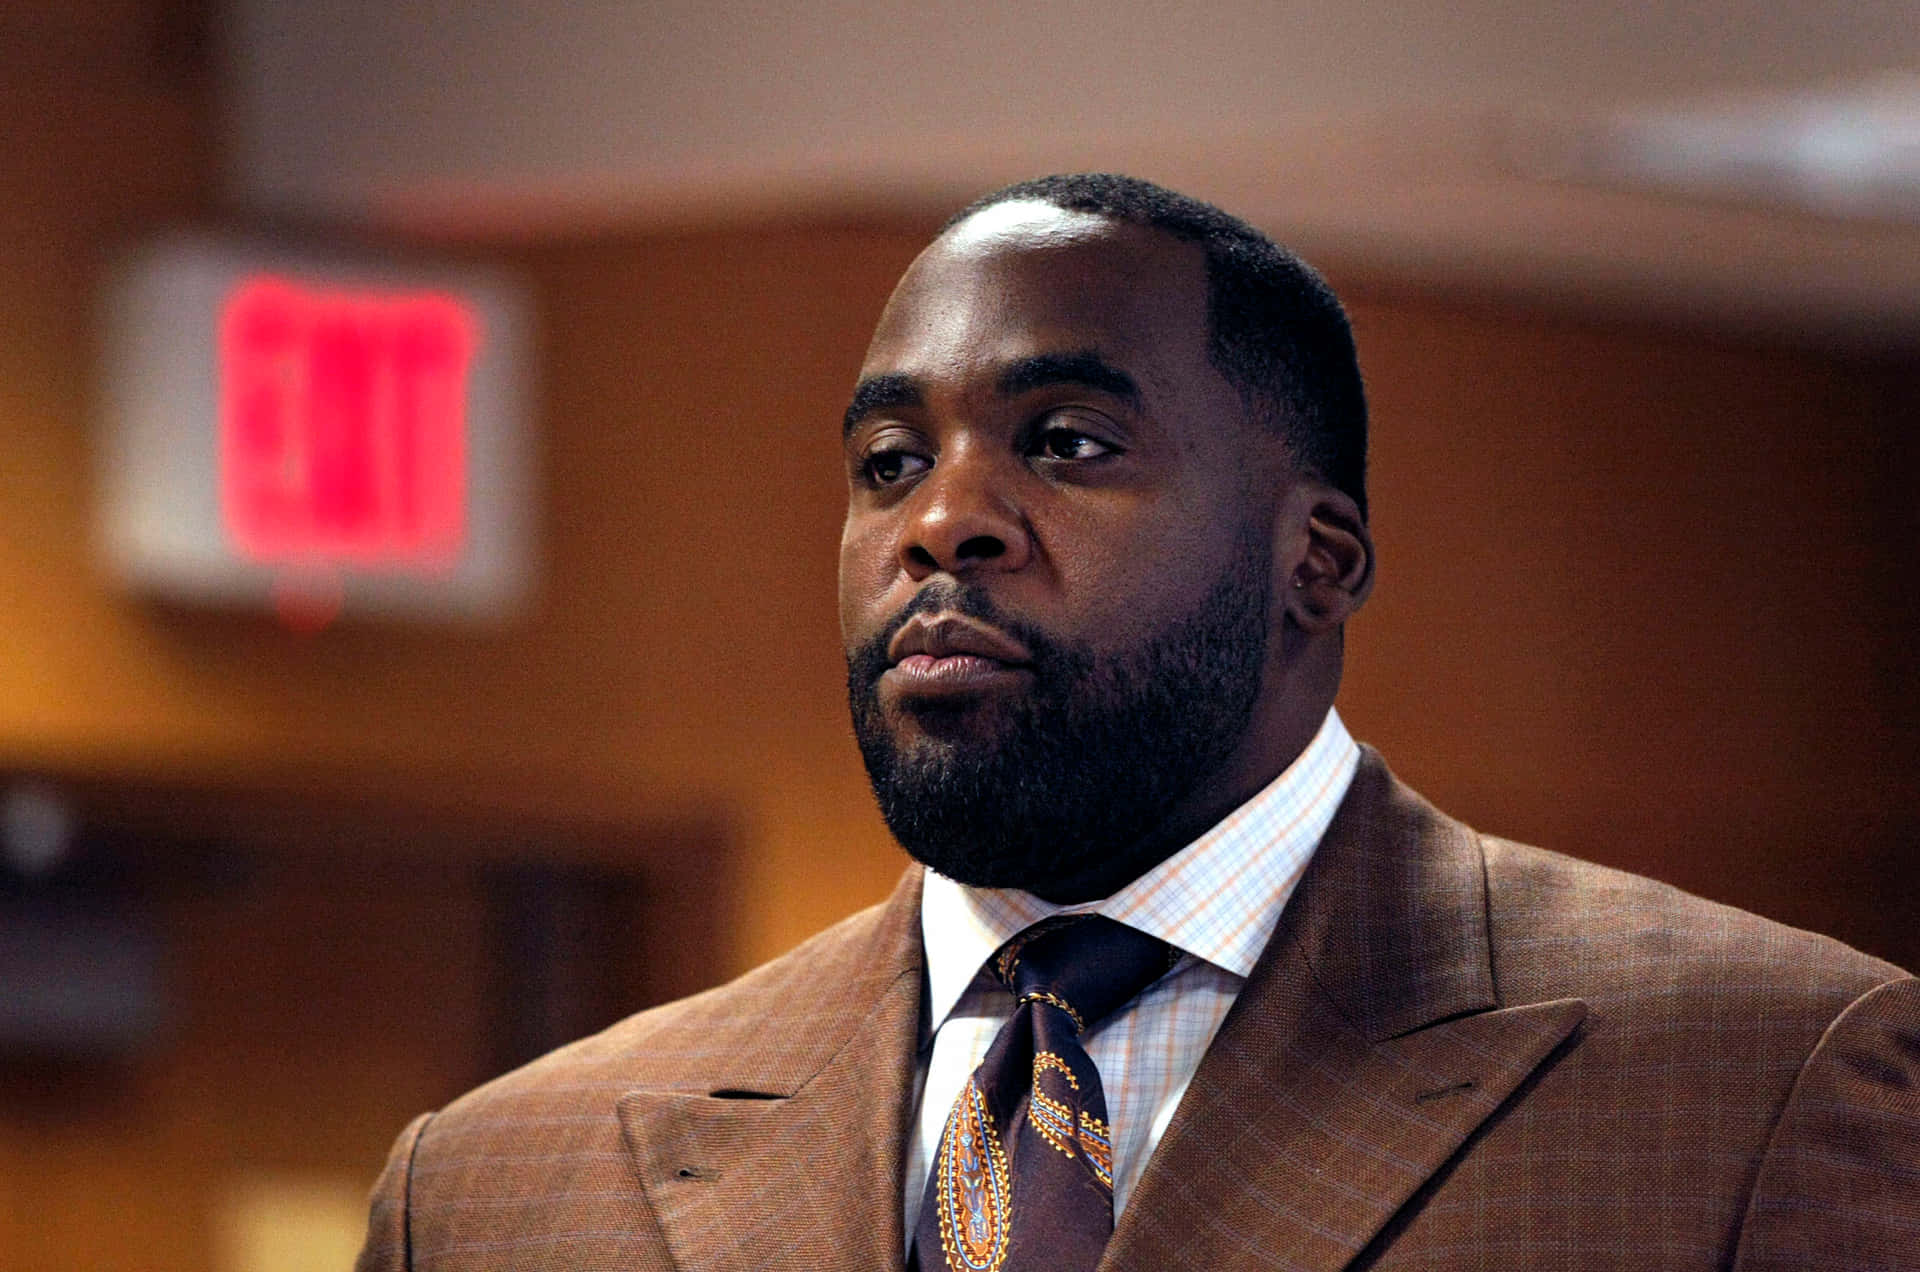 Kwame Kilpatrick During A Public Event Wallpaper